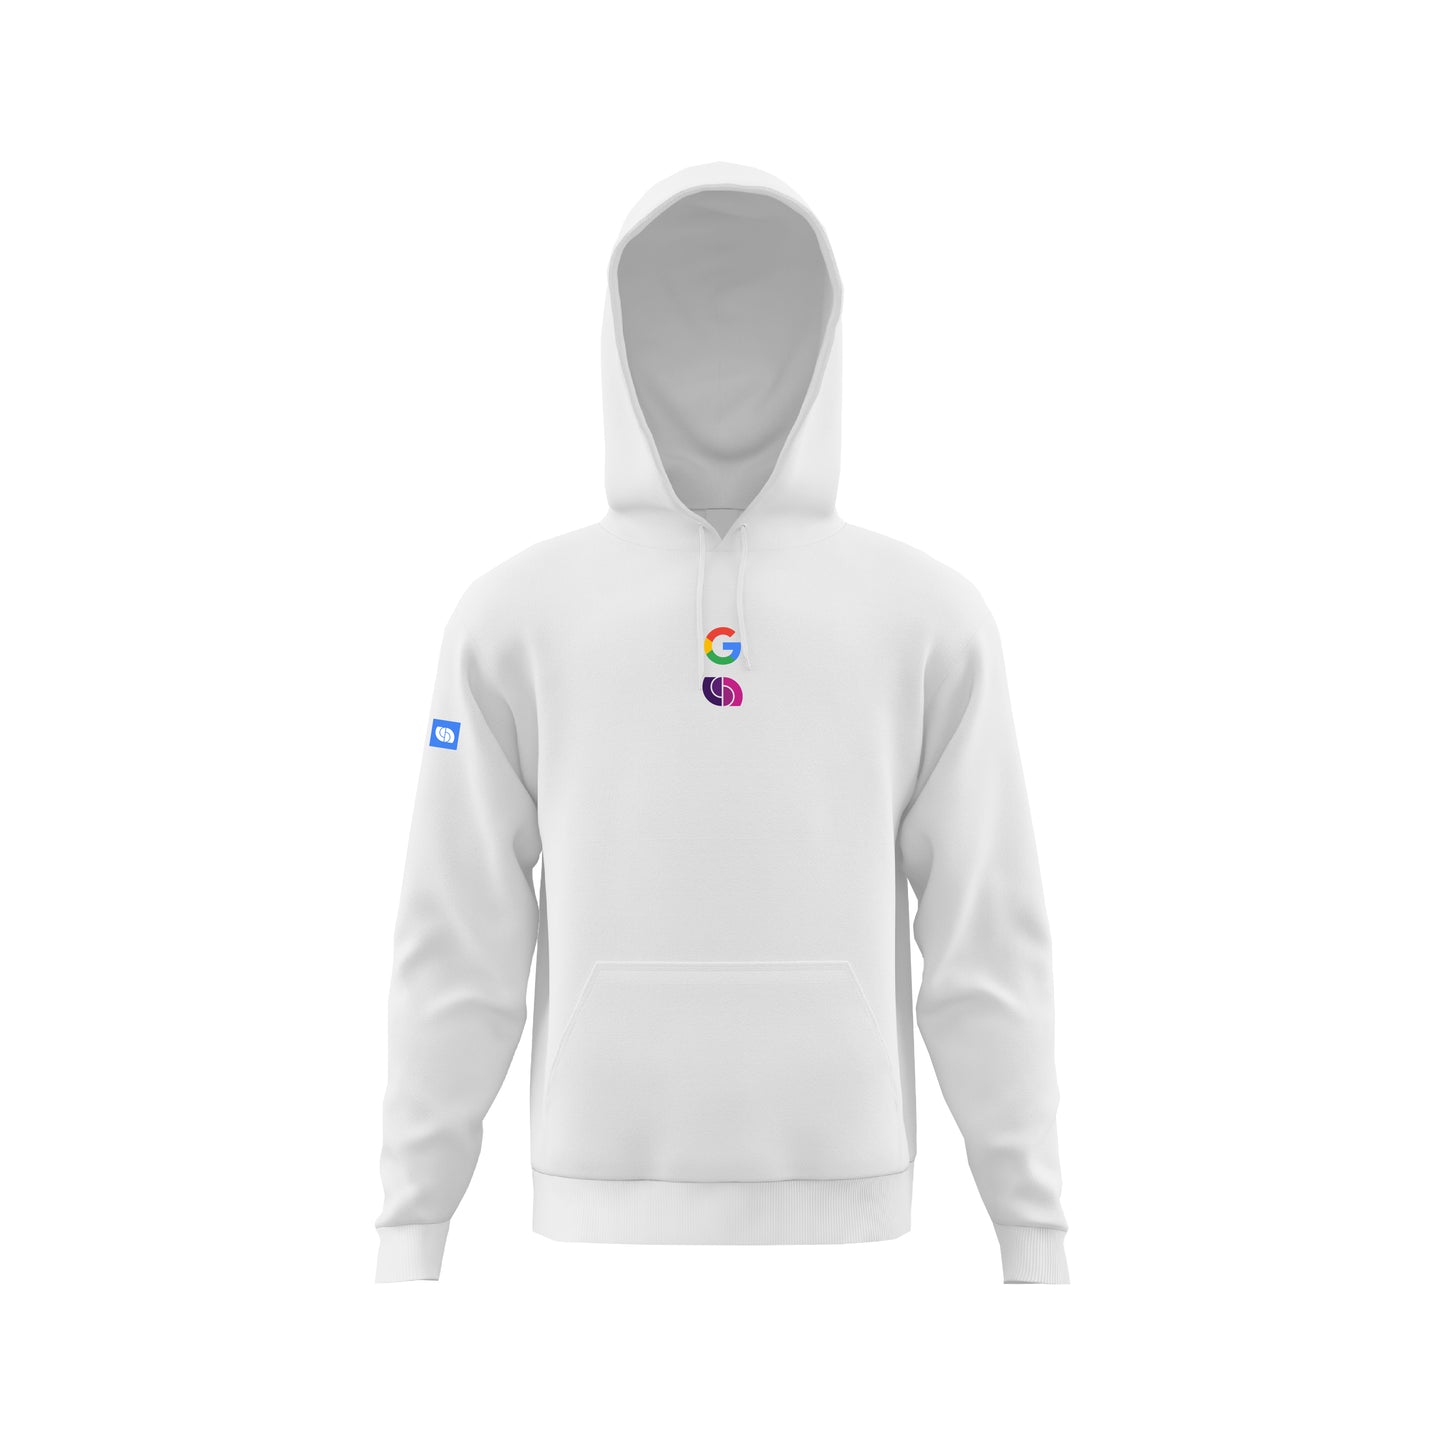 Google - Mind Force ® Hoodie by Athletic Forces -  Model 2